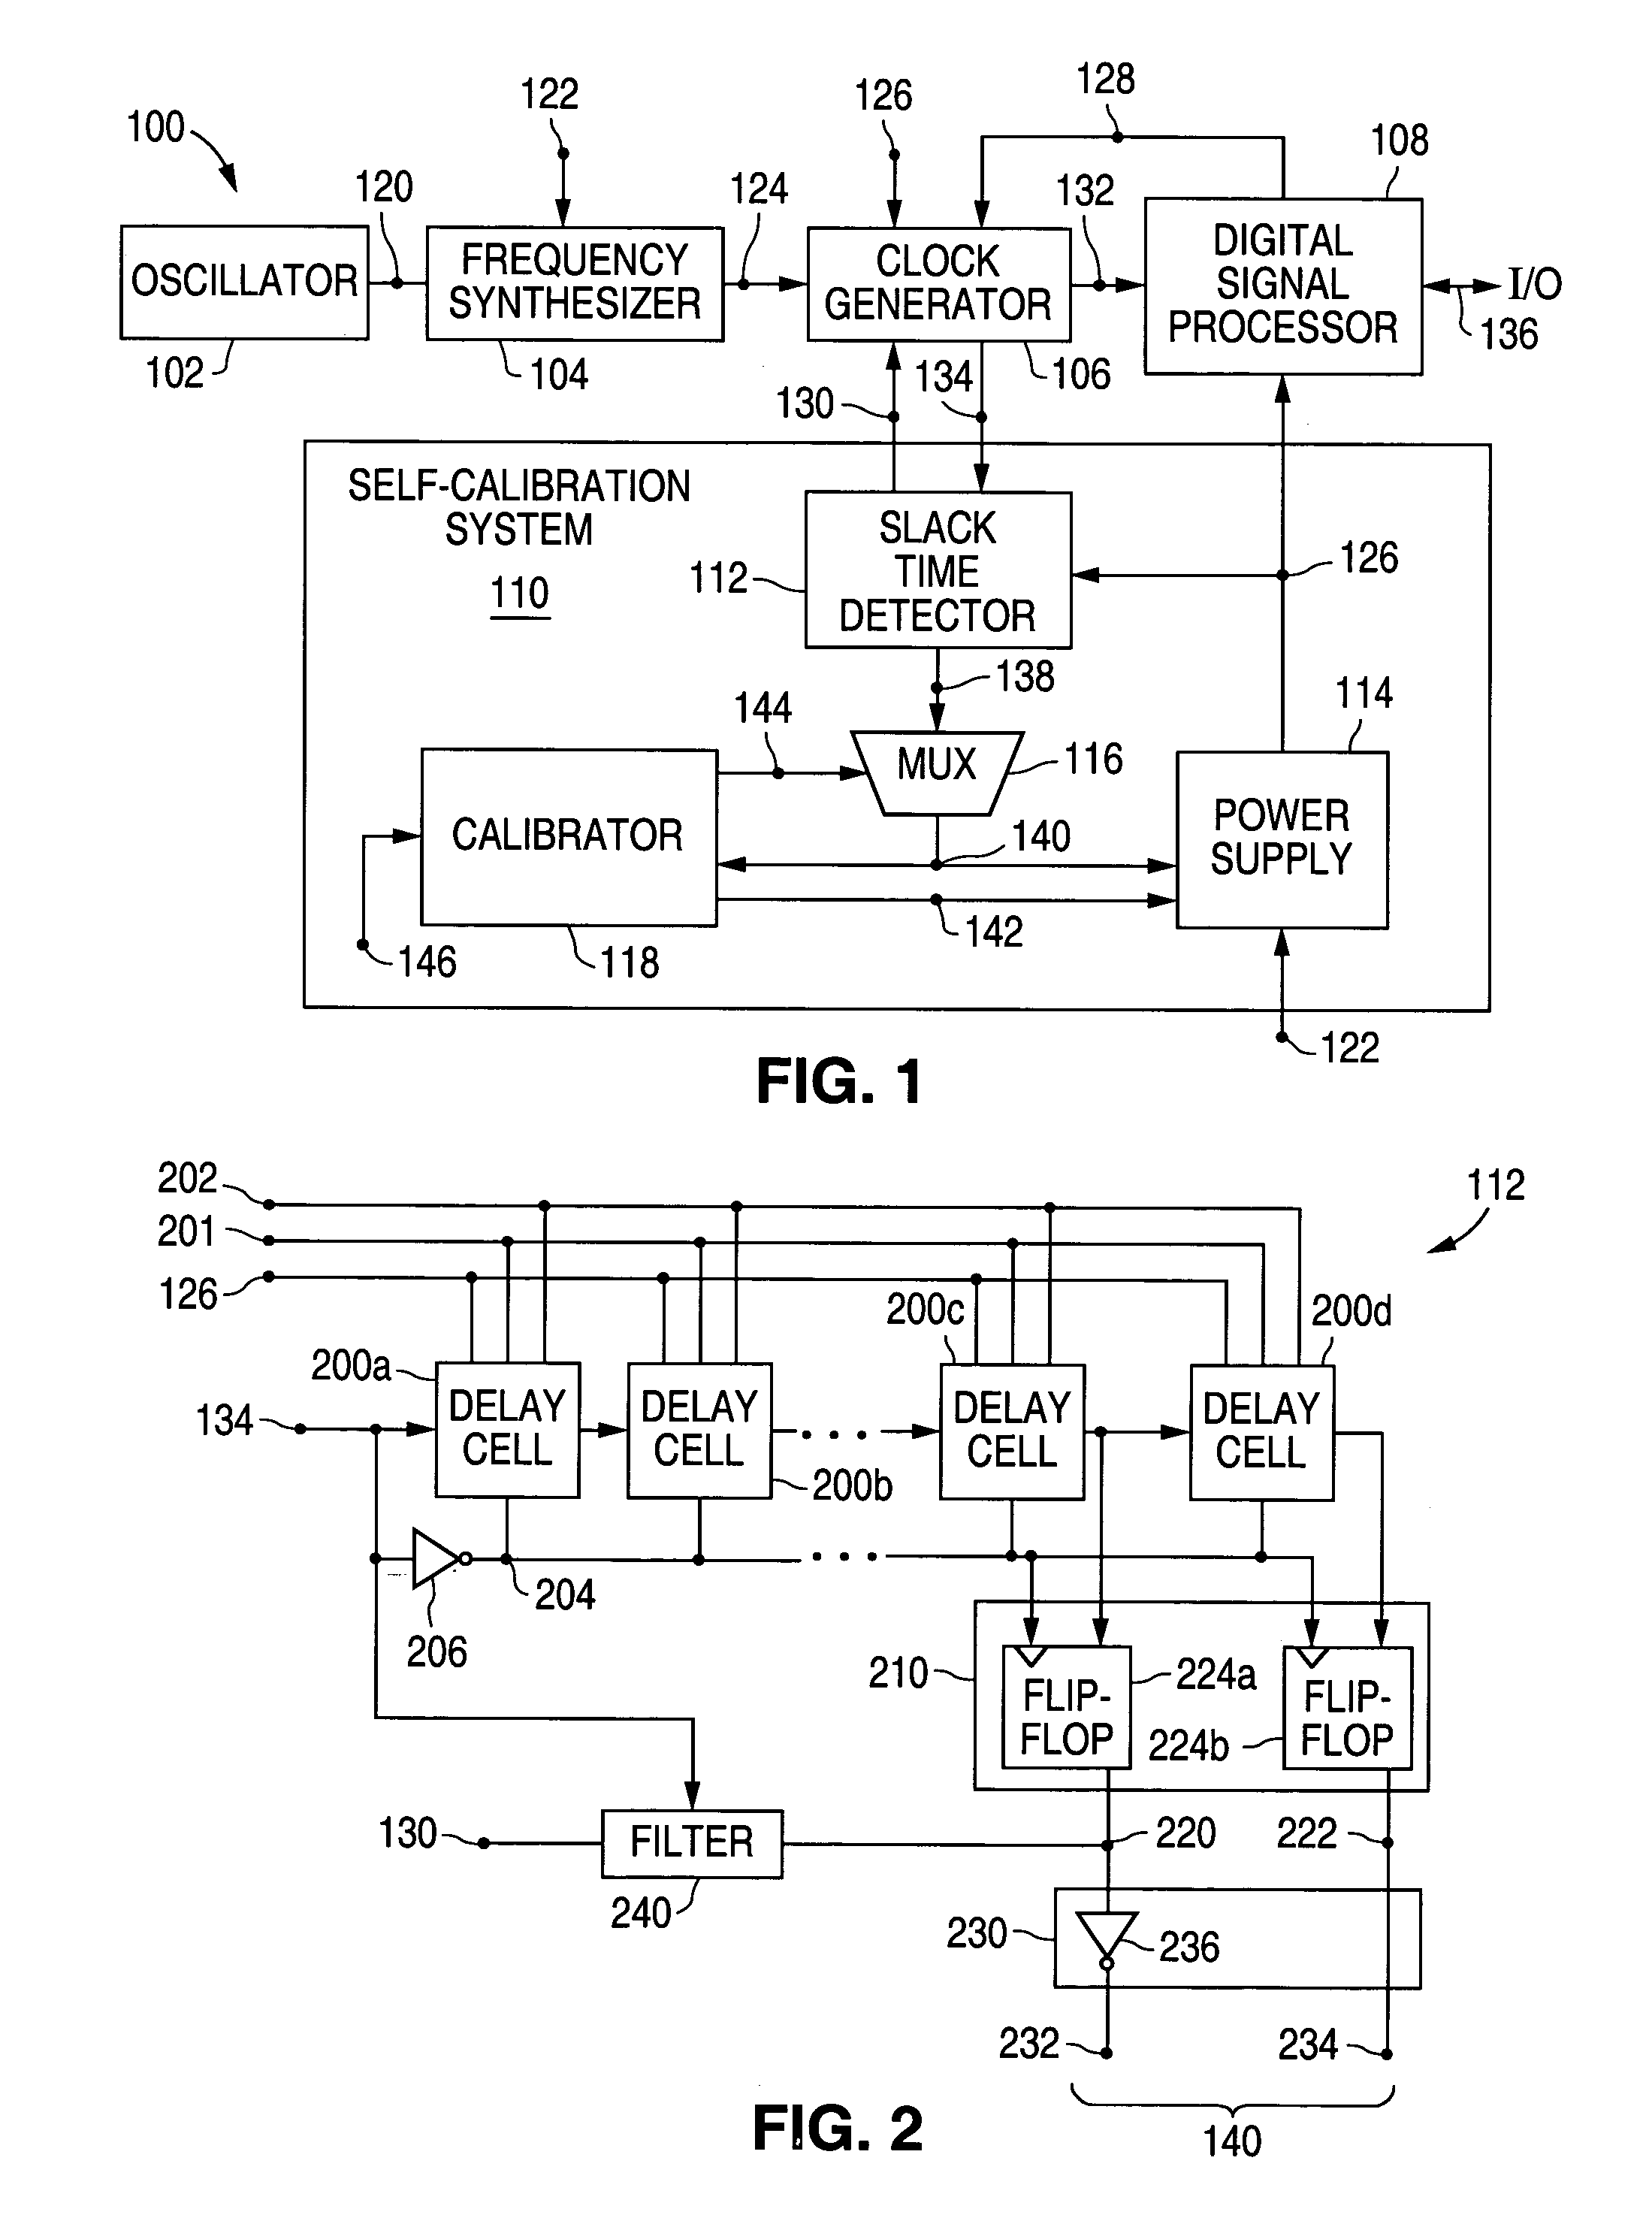 Method and system for providing self-calibration for adaptively adjusting a power supply voltage in a digital processing system